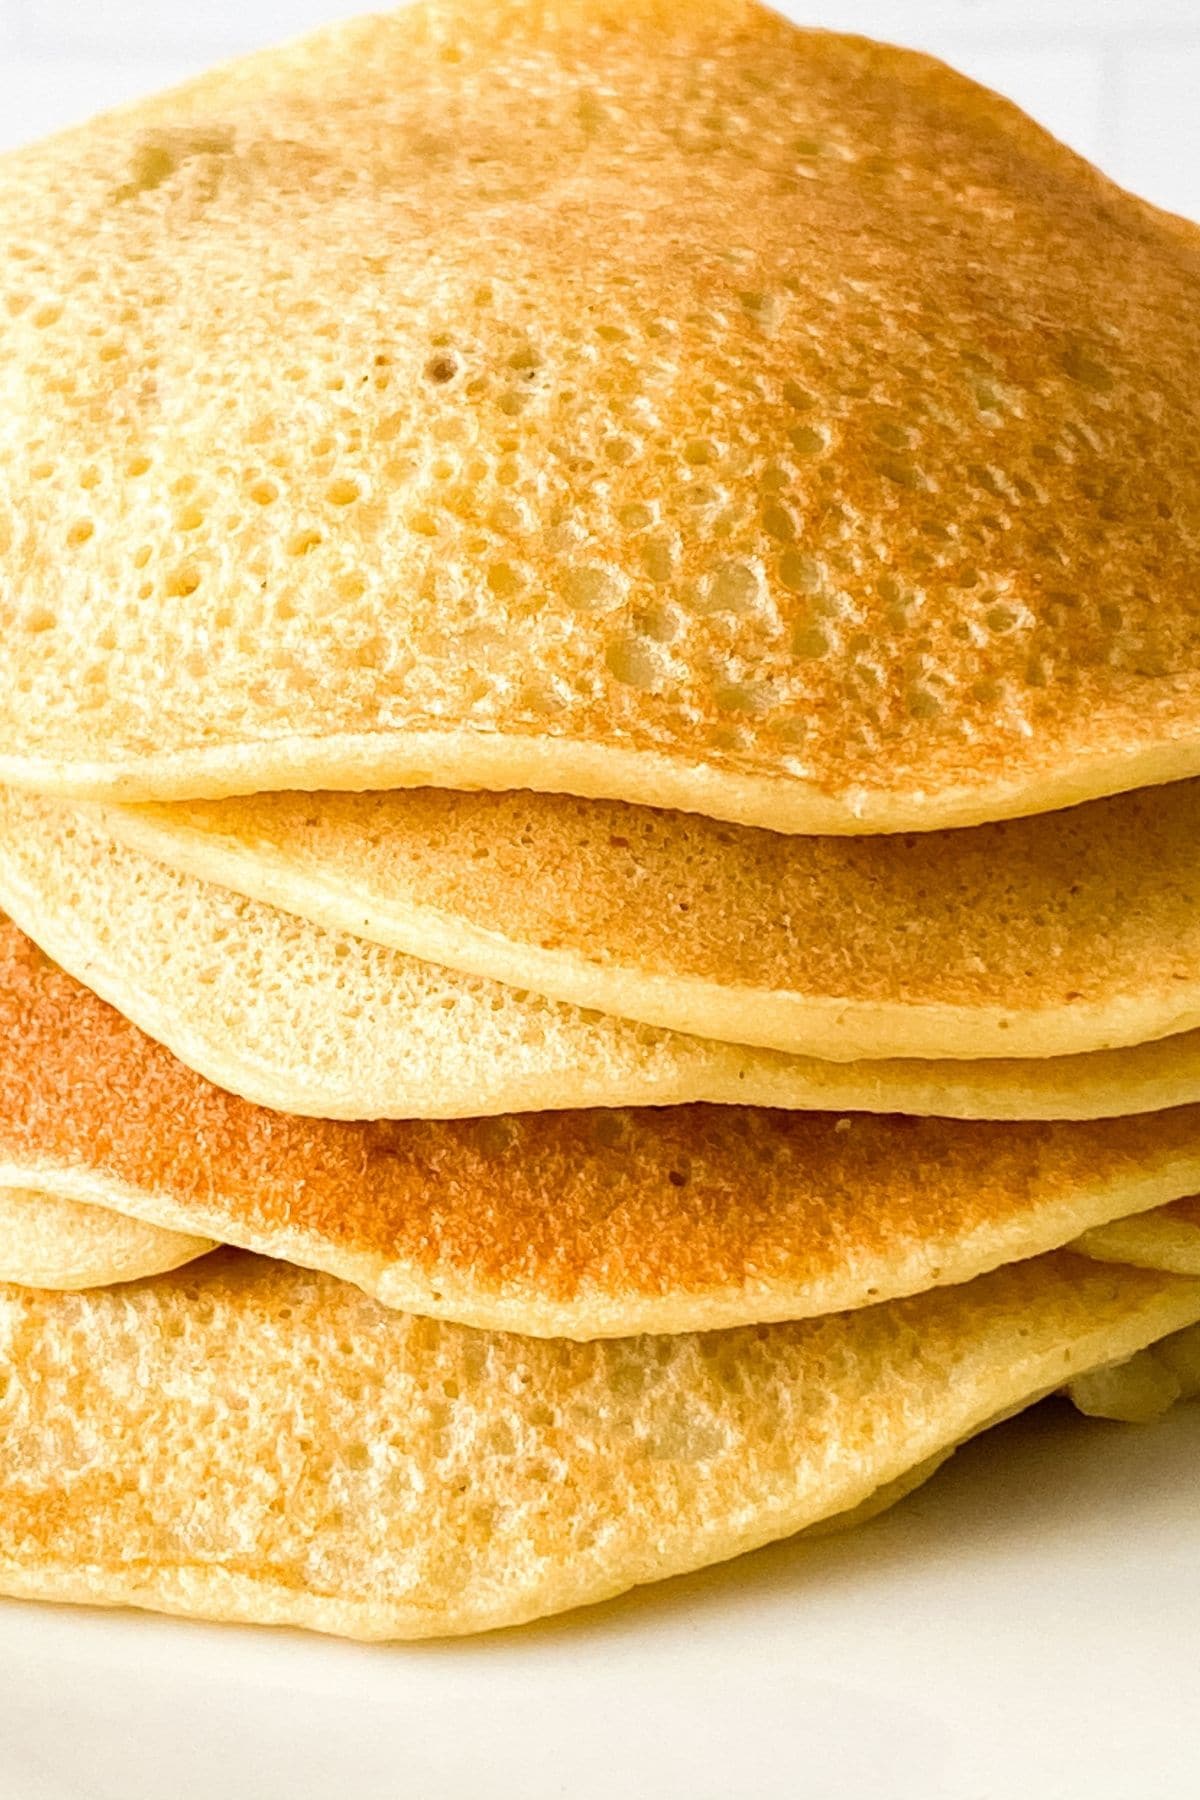 Stack of pancakes on white plate